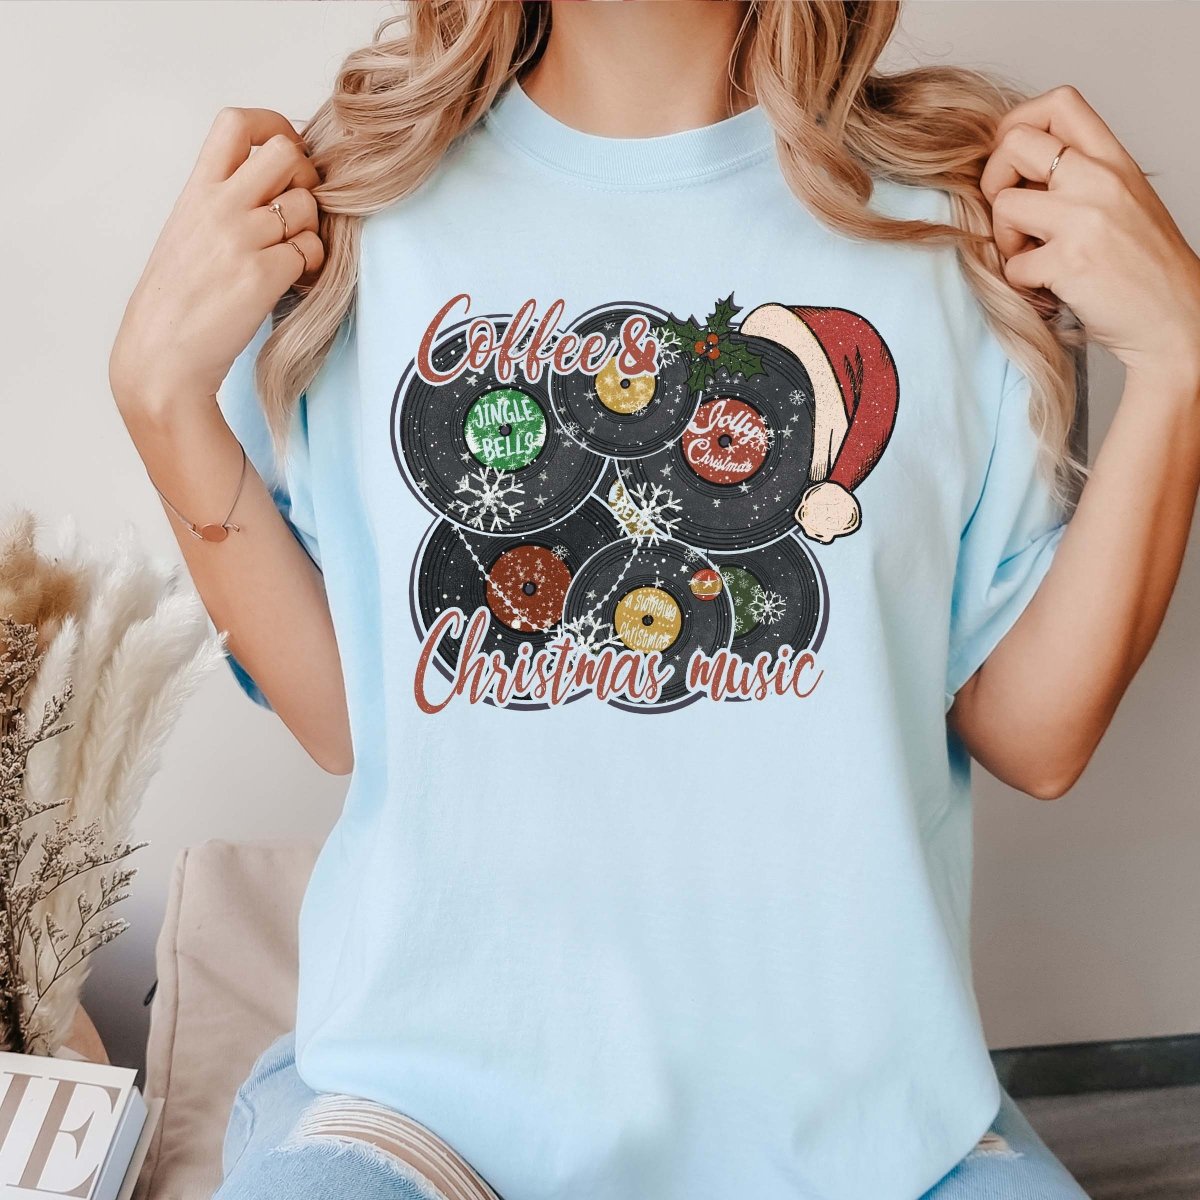 Coffee & Christmas Music records Comfort color Wholesale tee - Limeberry Designs